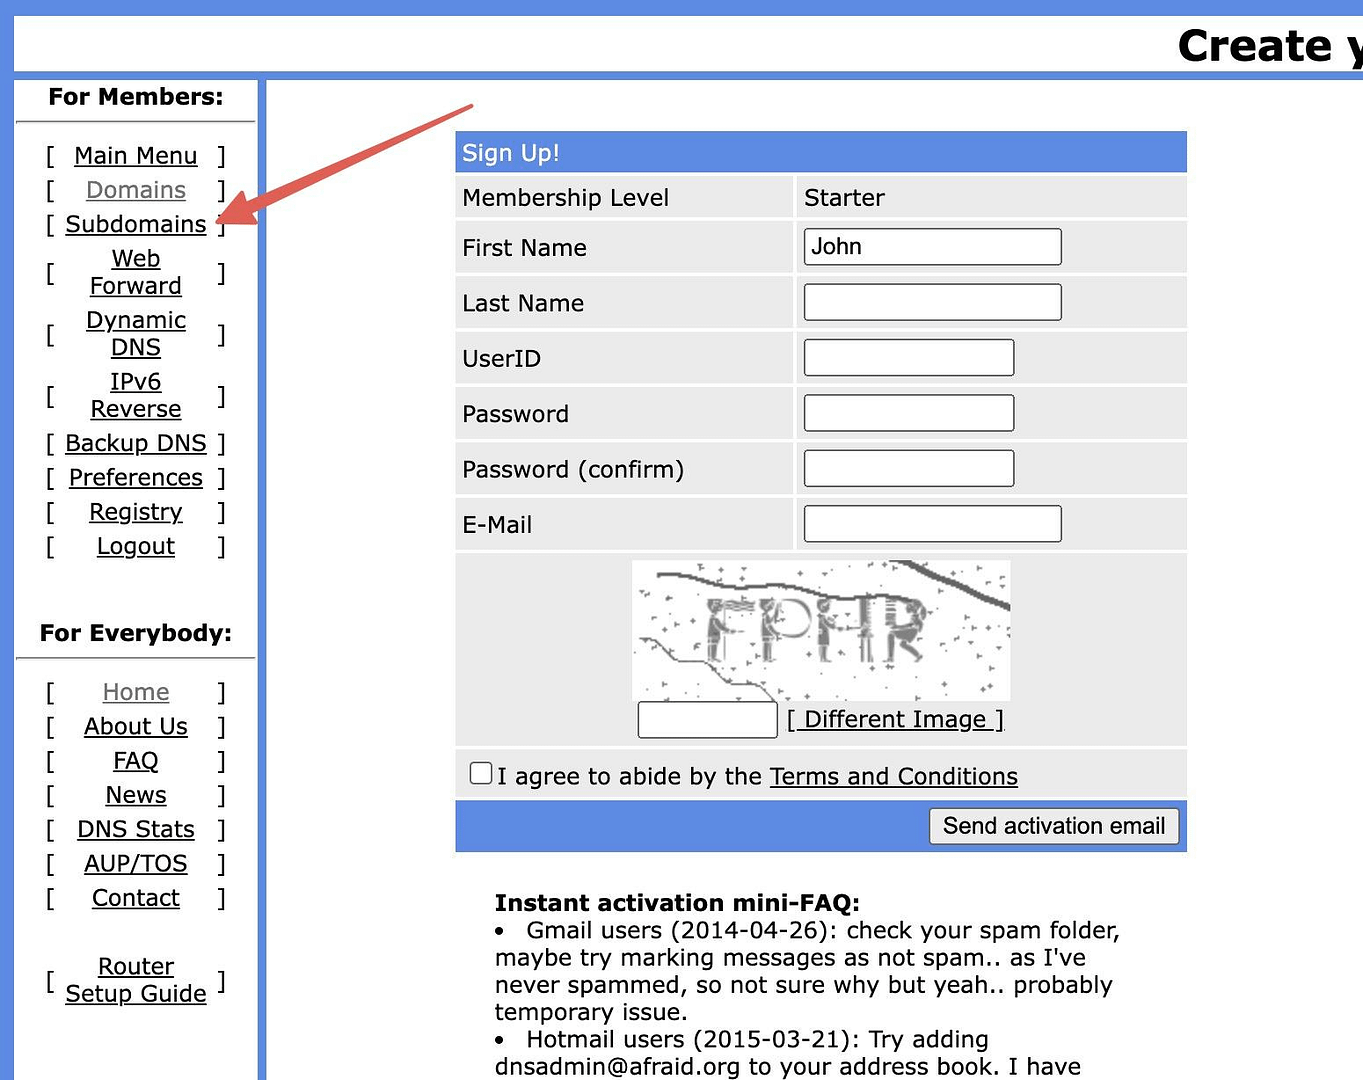 FreeDNS signup page with a red arrow pointing to "Subdomains".